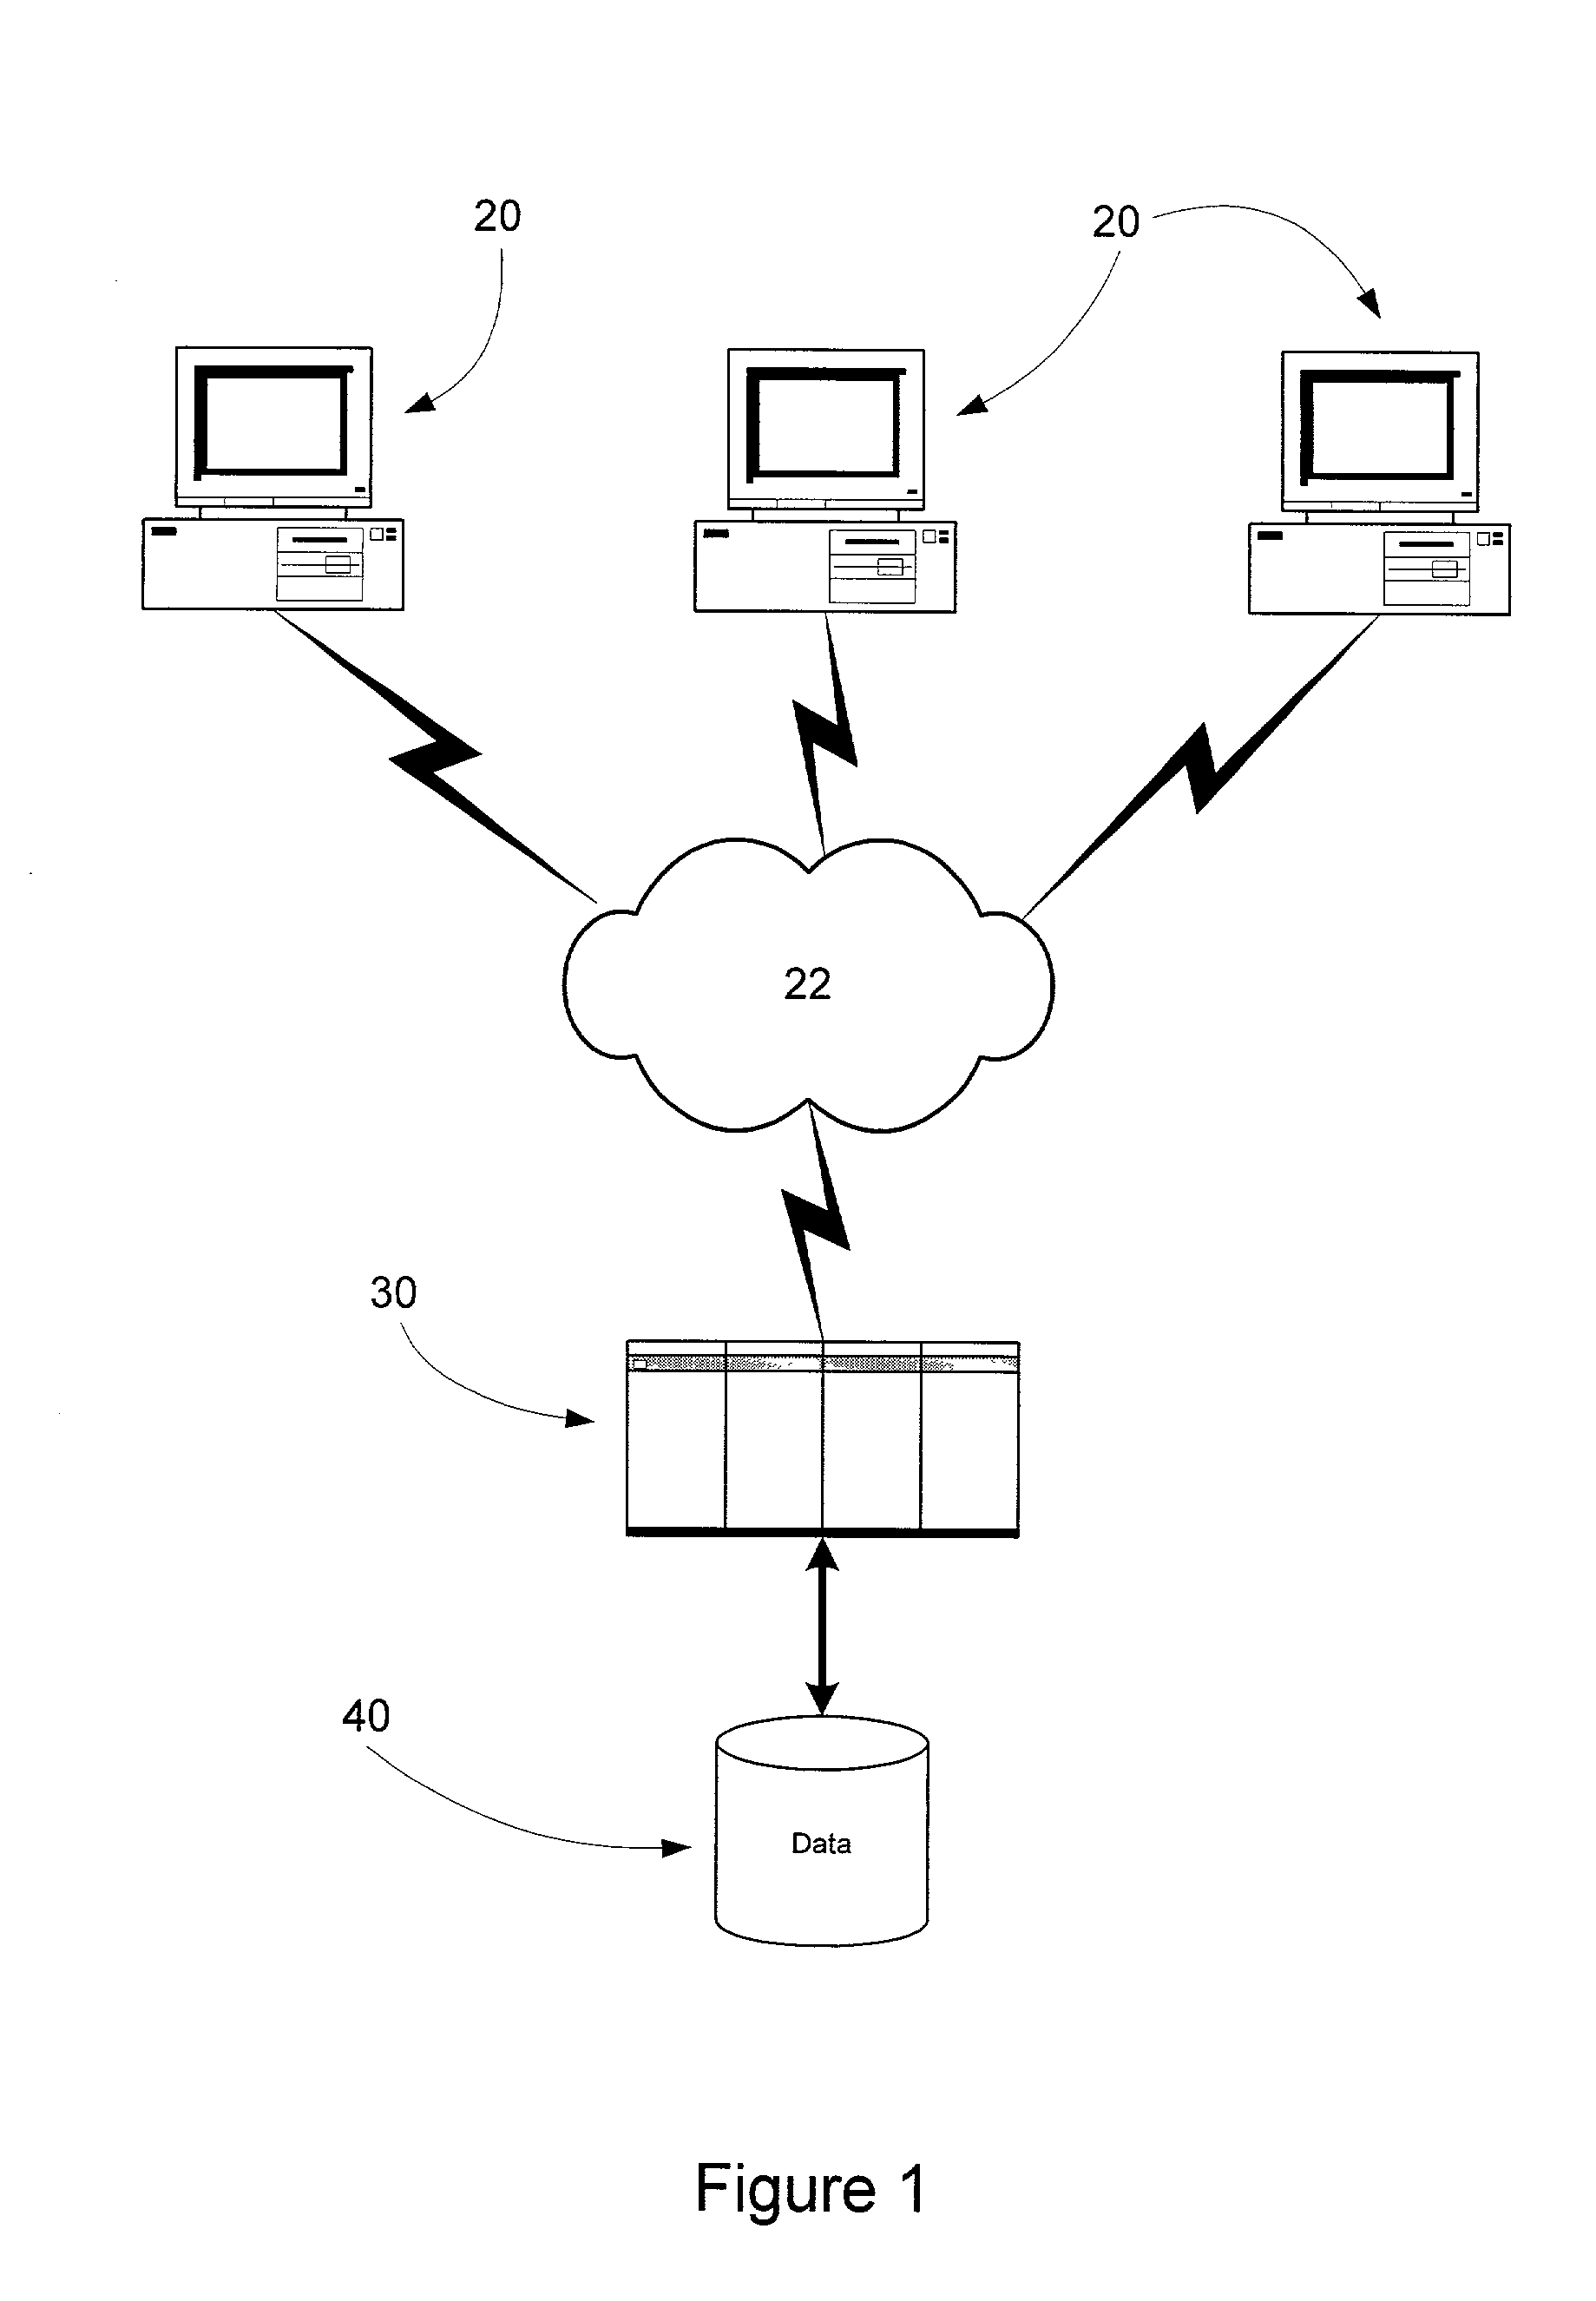 Method for assisting a user in selecting and purchasing tires